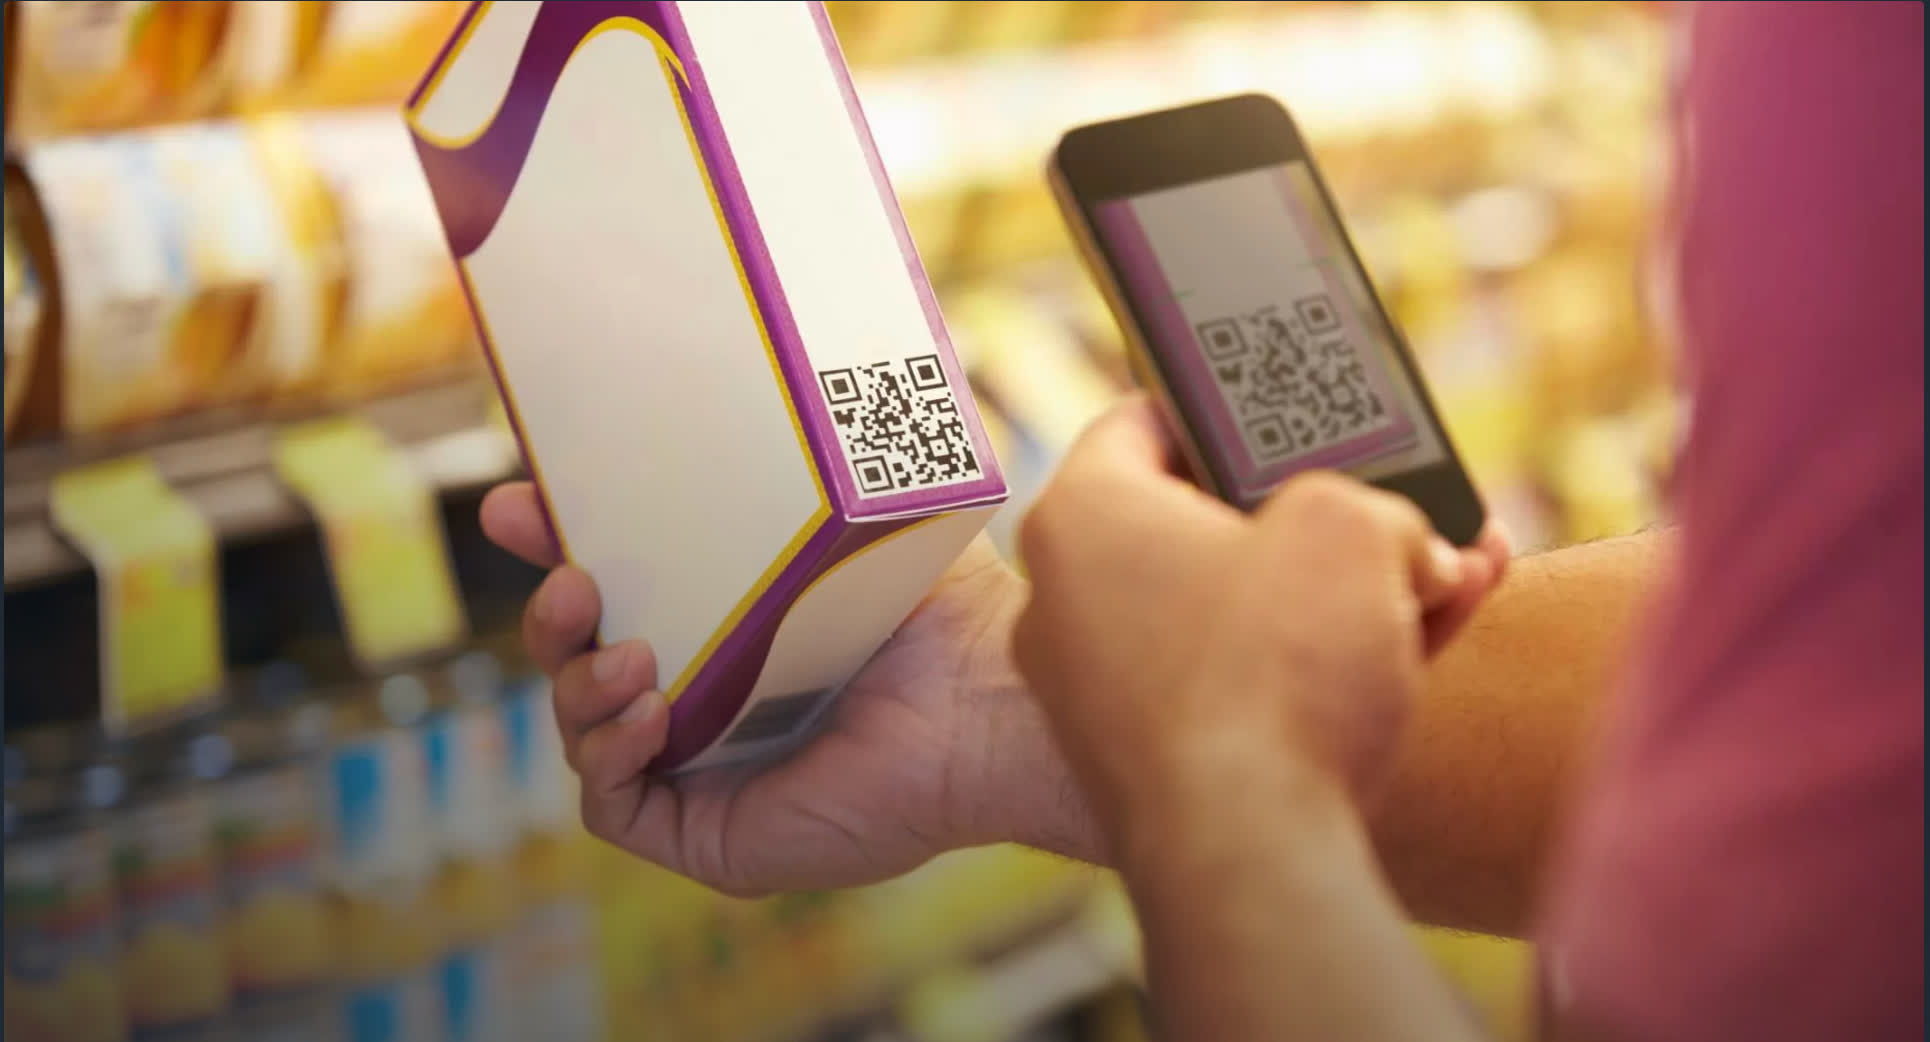 Traditional barcodes to be replaced with QR-style 2D codes by 2027